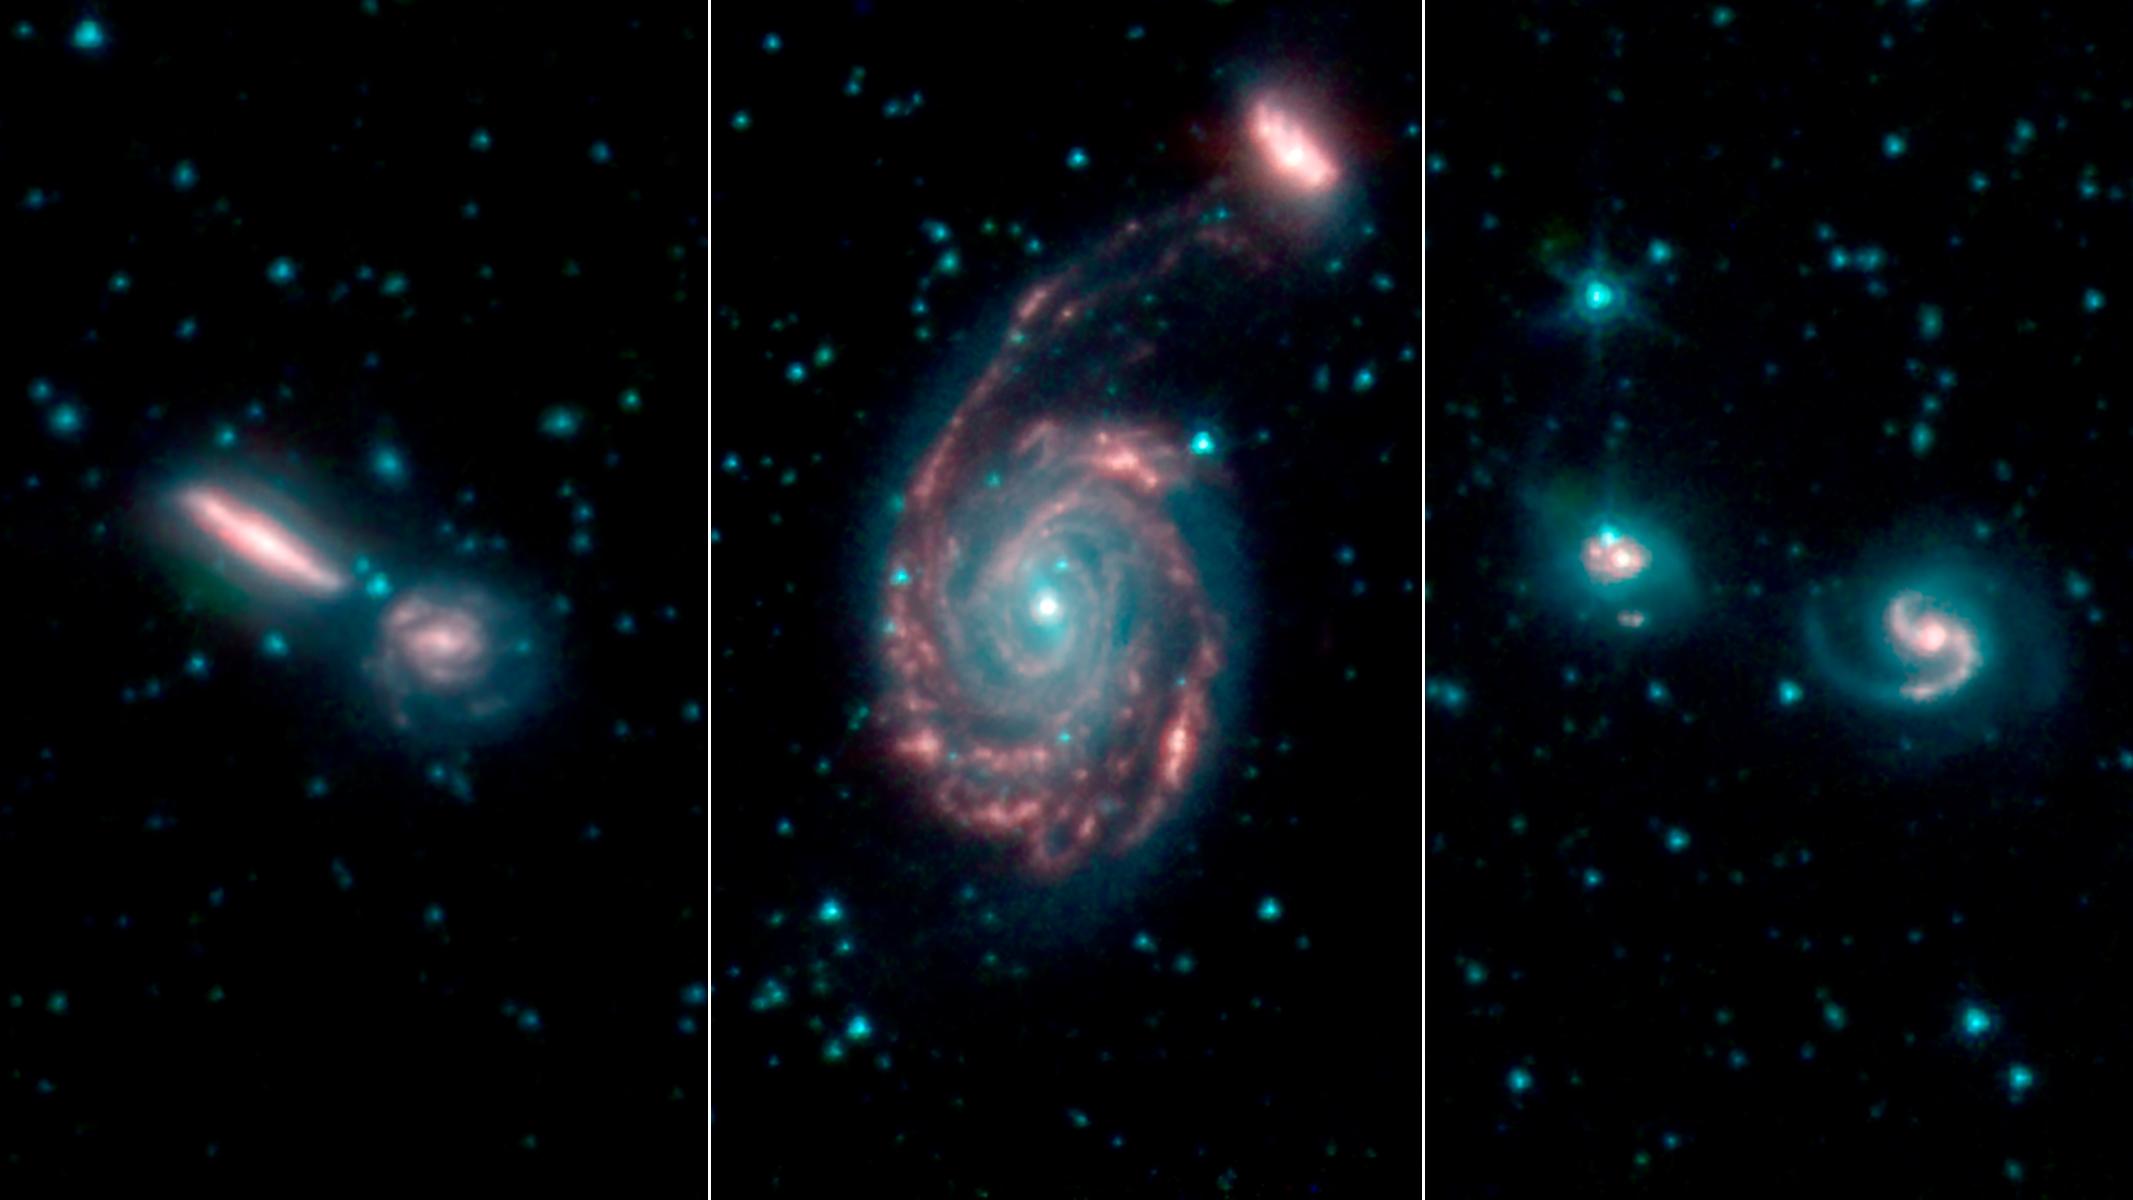 These three images, by NASAs Spitzer Space Telescope, show merging galaxies observed for the Great Observatories All-sky LIRG Survey, or GOALS.